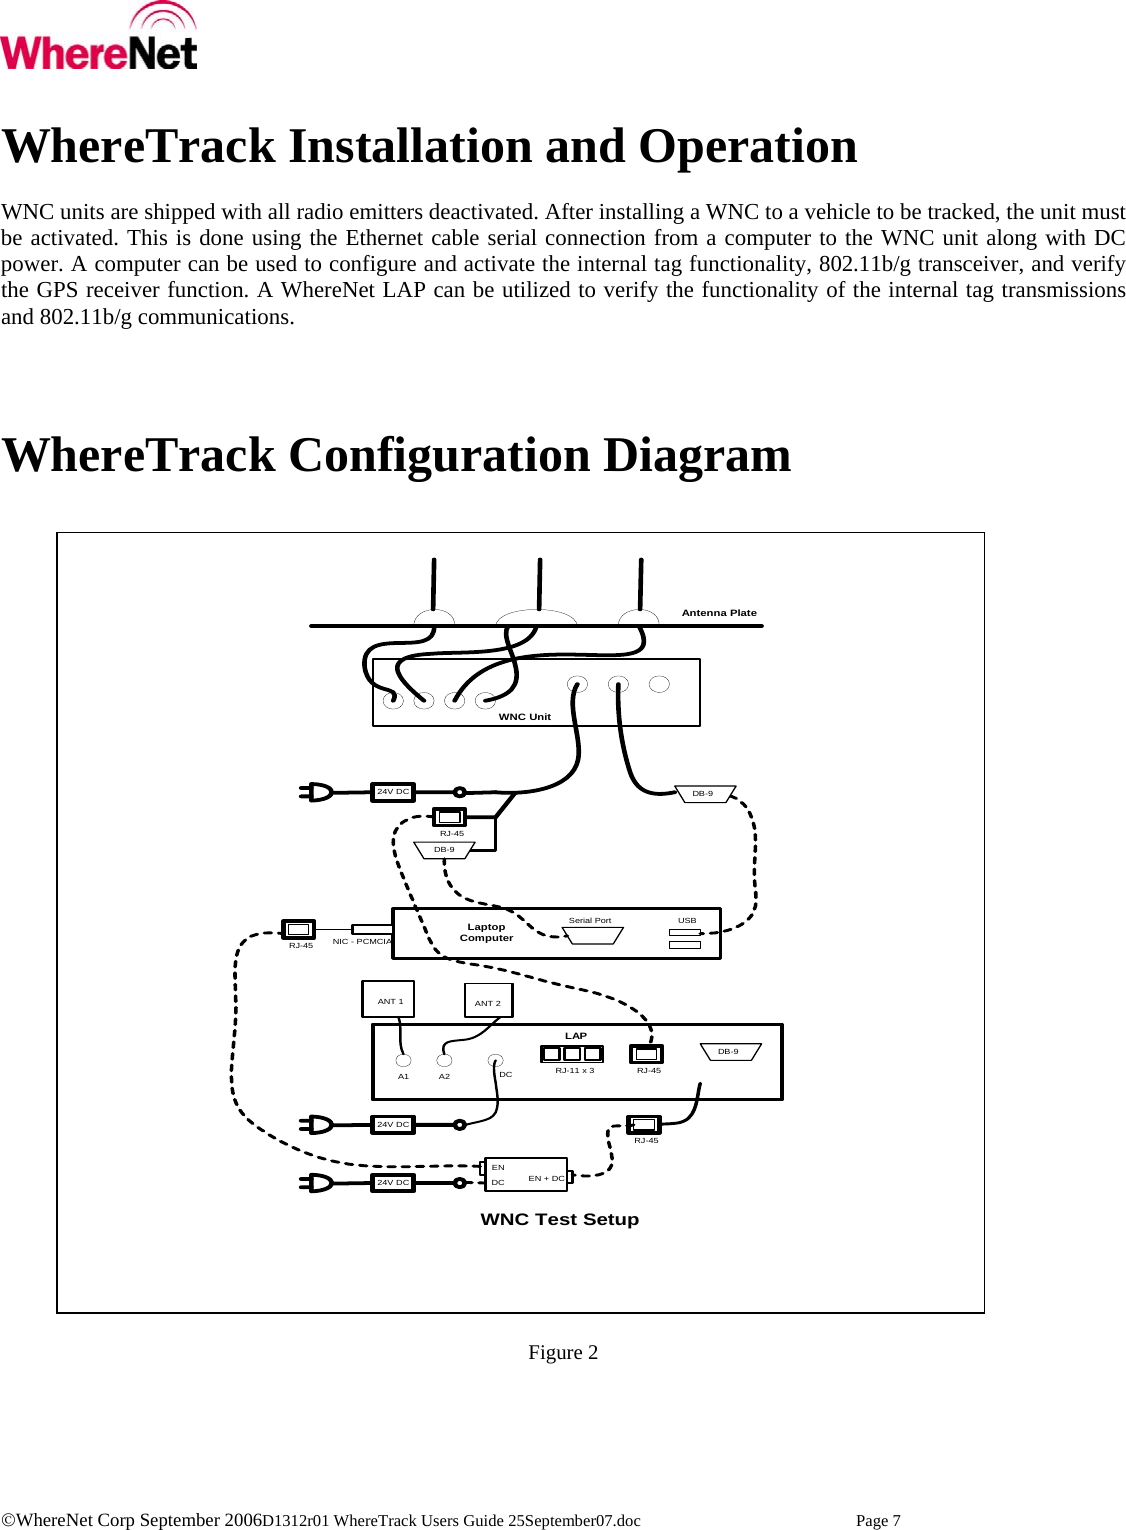    ©WhereNet Corp September 2006D1312r01 WhereTrack Users Guide 25September07.doc  Page 7  WhereTrack Installation and Operation  WNC units are shipped with all radio emitters deactivated. After installing a WNC to a vehicle to be tracked, the unit must be activated. This is done using the Ethernet cable serial connection from a computer to the WNC unit along with DC power. A computer can be used to configure and activate the internal tag functionality, 802.11b/g transceiver, and verify the GPS receiver function. A WhereNet LAP can be utilized to verify the functionality of the internal tag transmissions and 802.11b/g communications.       WhereTrack Configuration Diagram    DB-9RJ-45LaptopComputerUSBSerial PortNIC - PCMCIARJ-45DB-9LAPRJ-45DB-9RJ-11 x 3RJ-45A1 A2 DCANT 1 ANT 224V DC24V DCENDC EN + DC24V DCWNC Test SetupWNC UnitAntenna Plate     Figure 2      